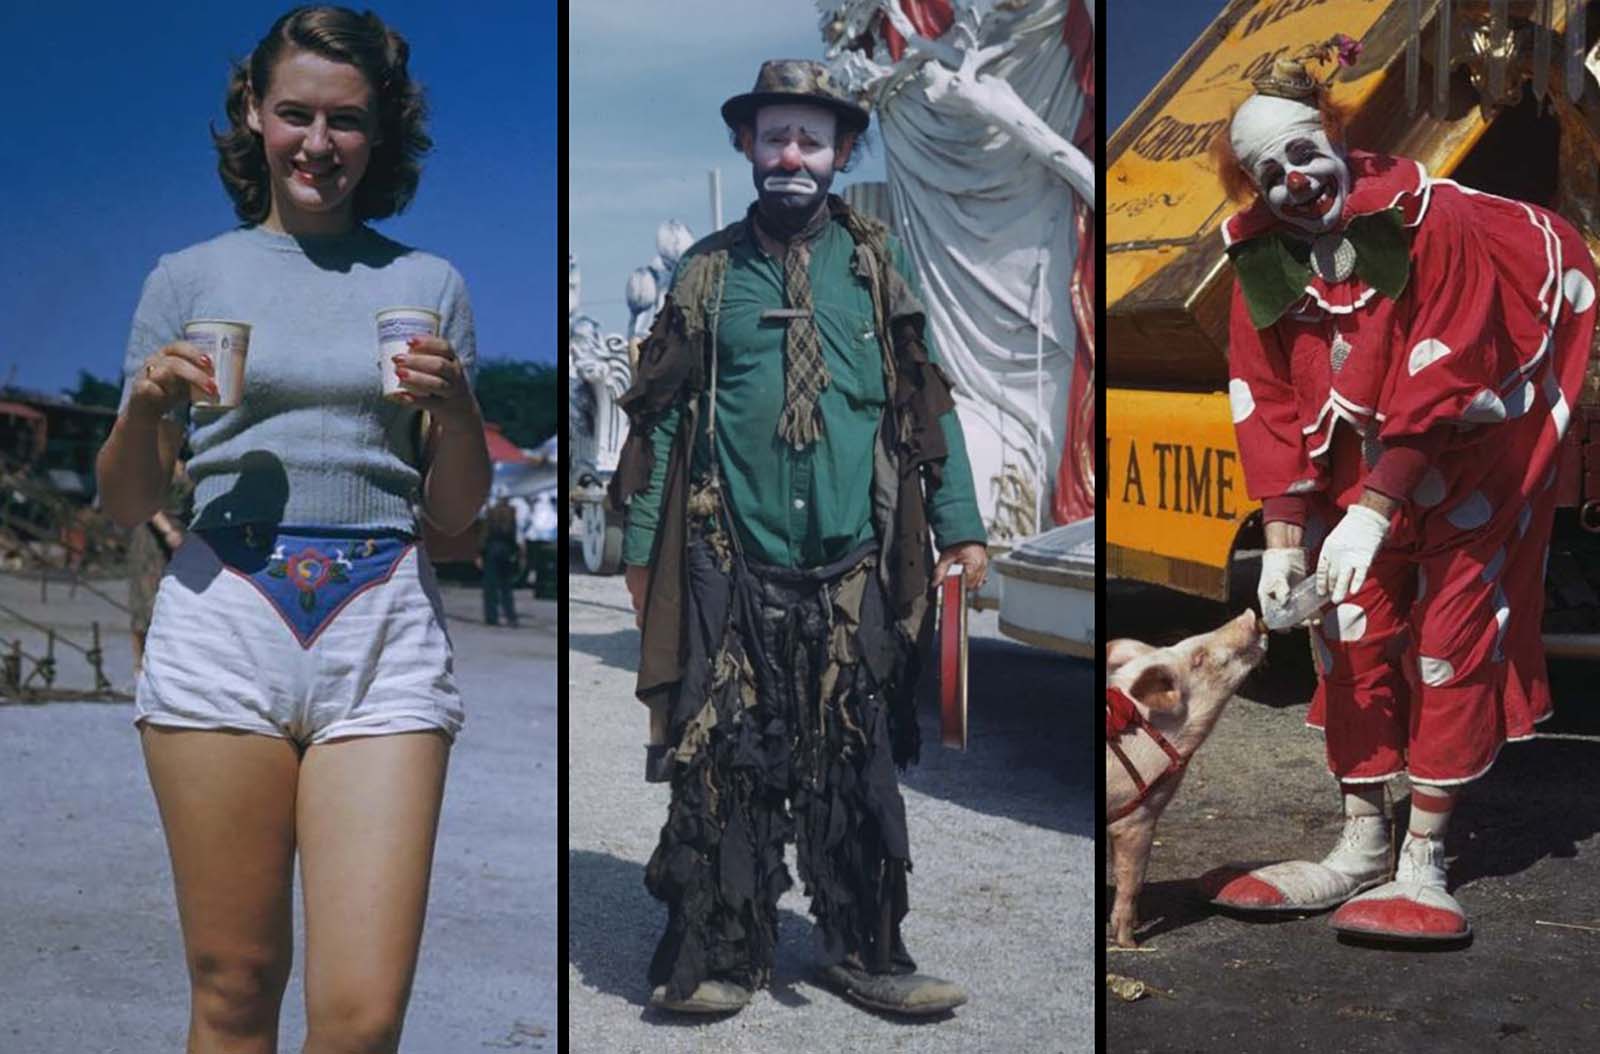 Stunning Colorful Photos of the Ringling Bros. and Barnum & Bailey Circus in the Late 1940s